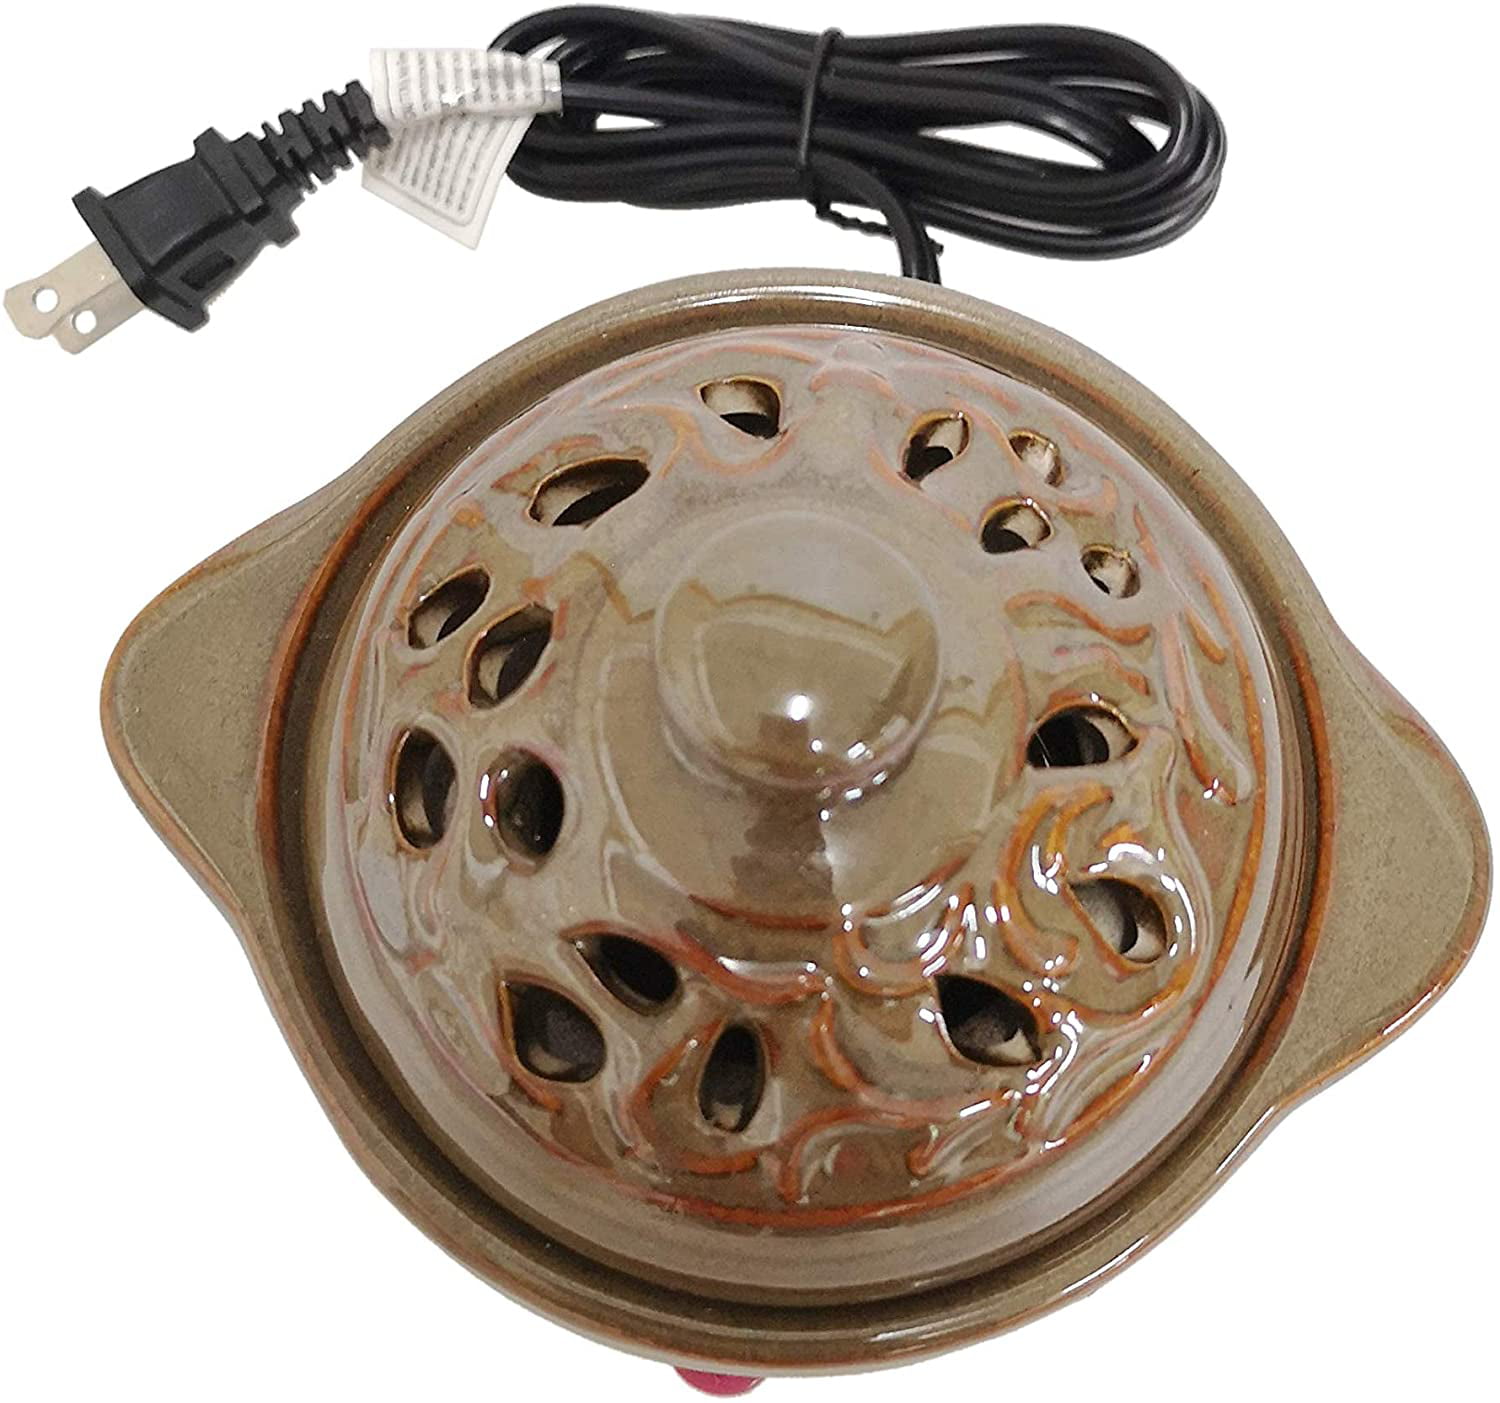 Find more Reduced--new Electric Liquid Potpourri Warmer for sale